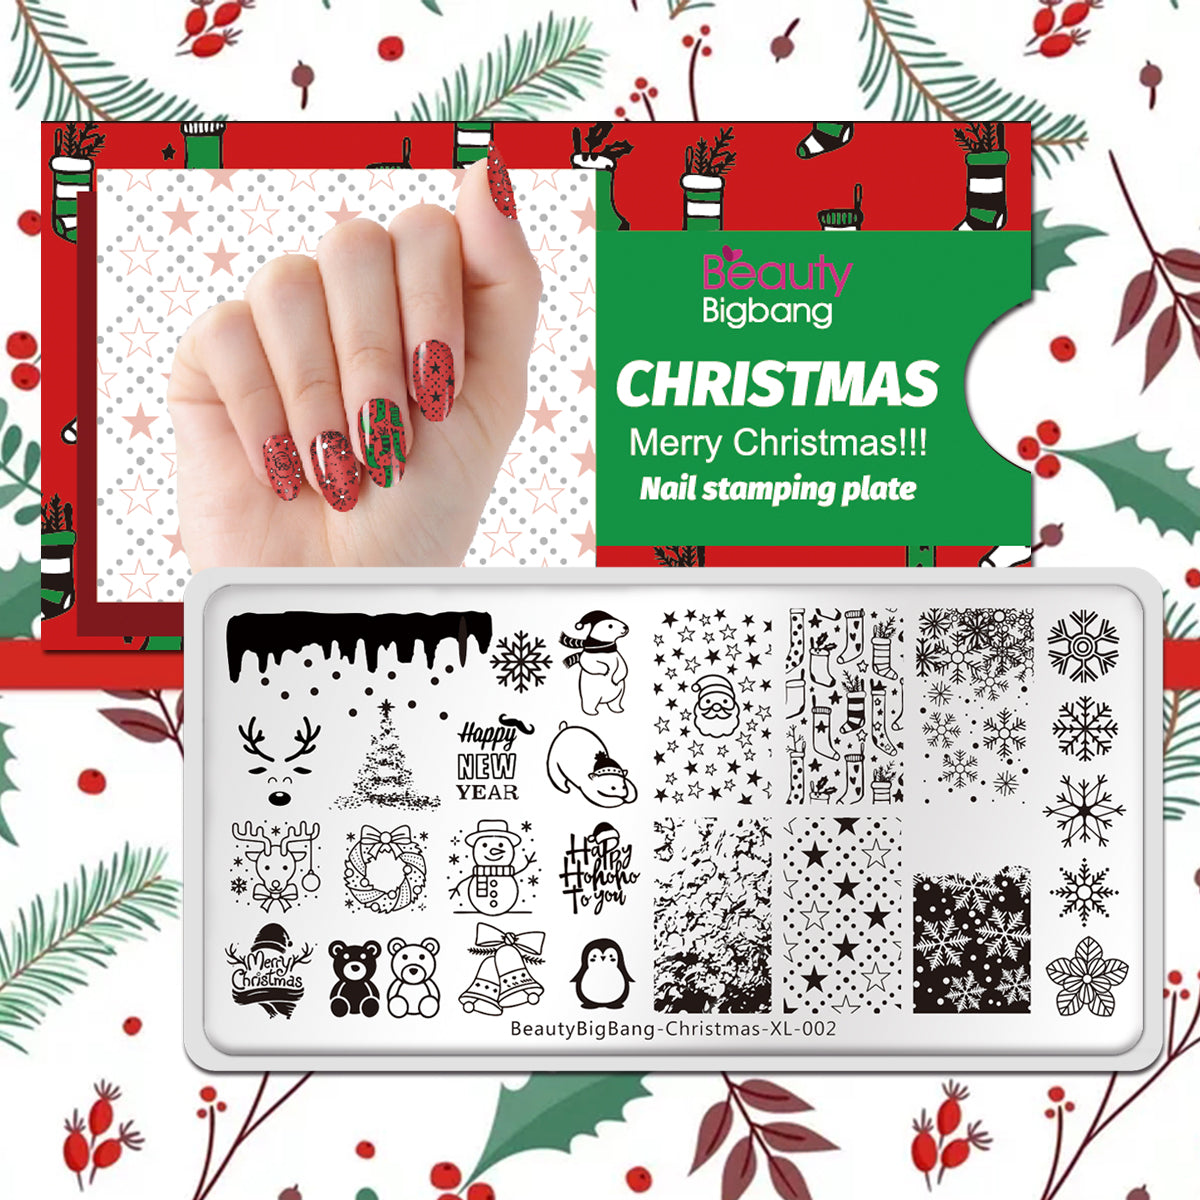 Christmas Tree Winter Theme Snowman Image Nail Art Stamp Stencil for D